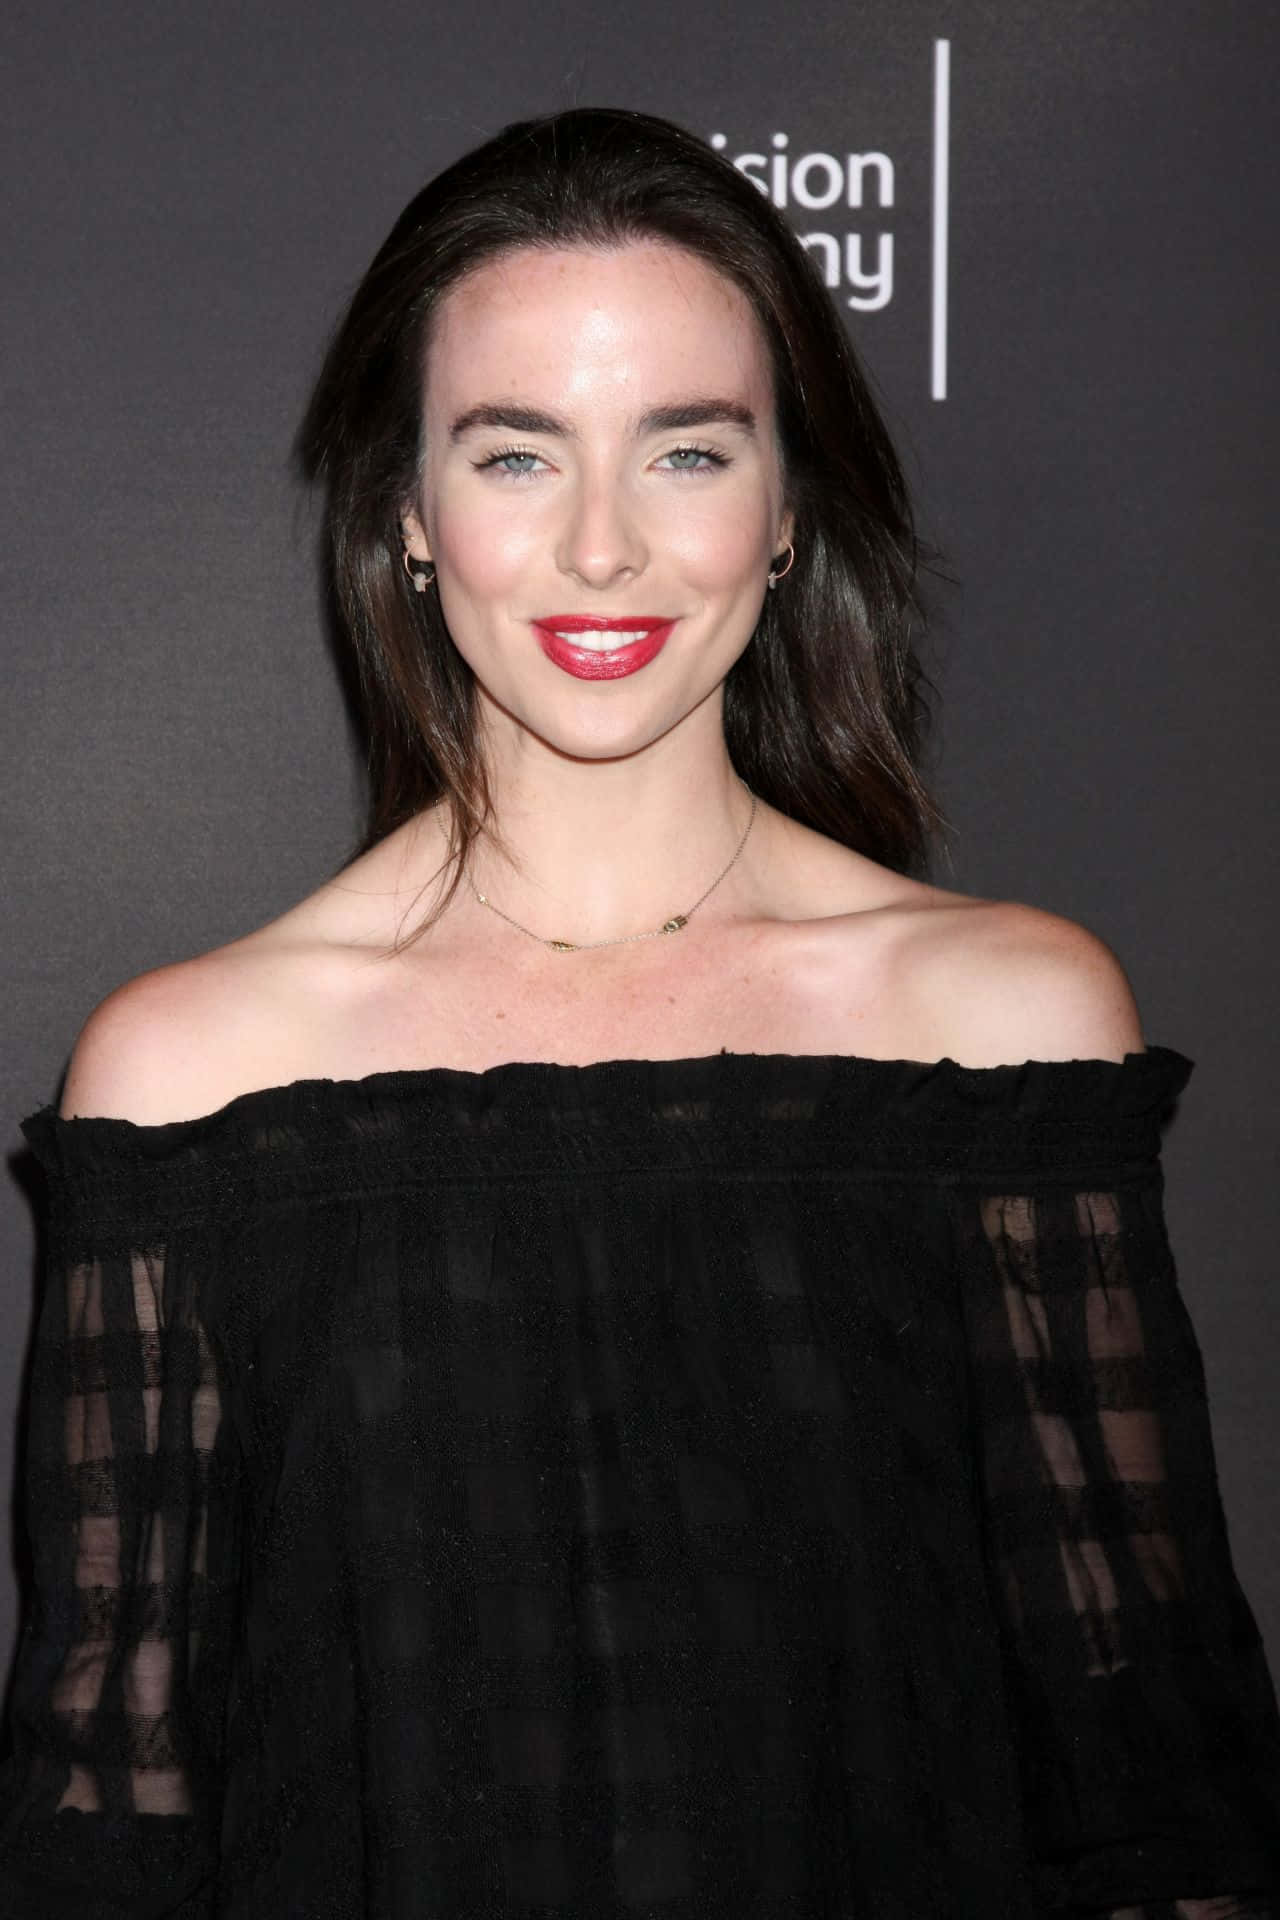 Actress Ashleigh Brewer Glowing In A Sophisticated Dress Wallpaper